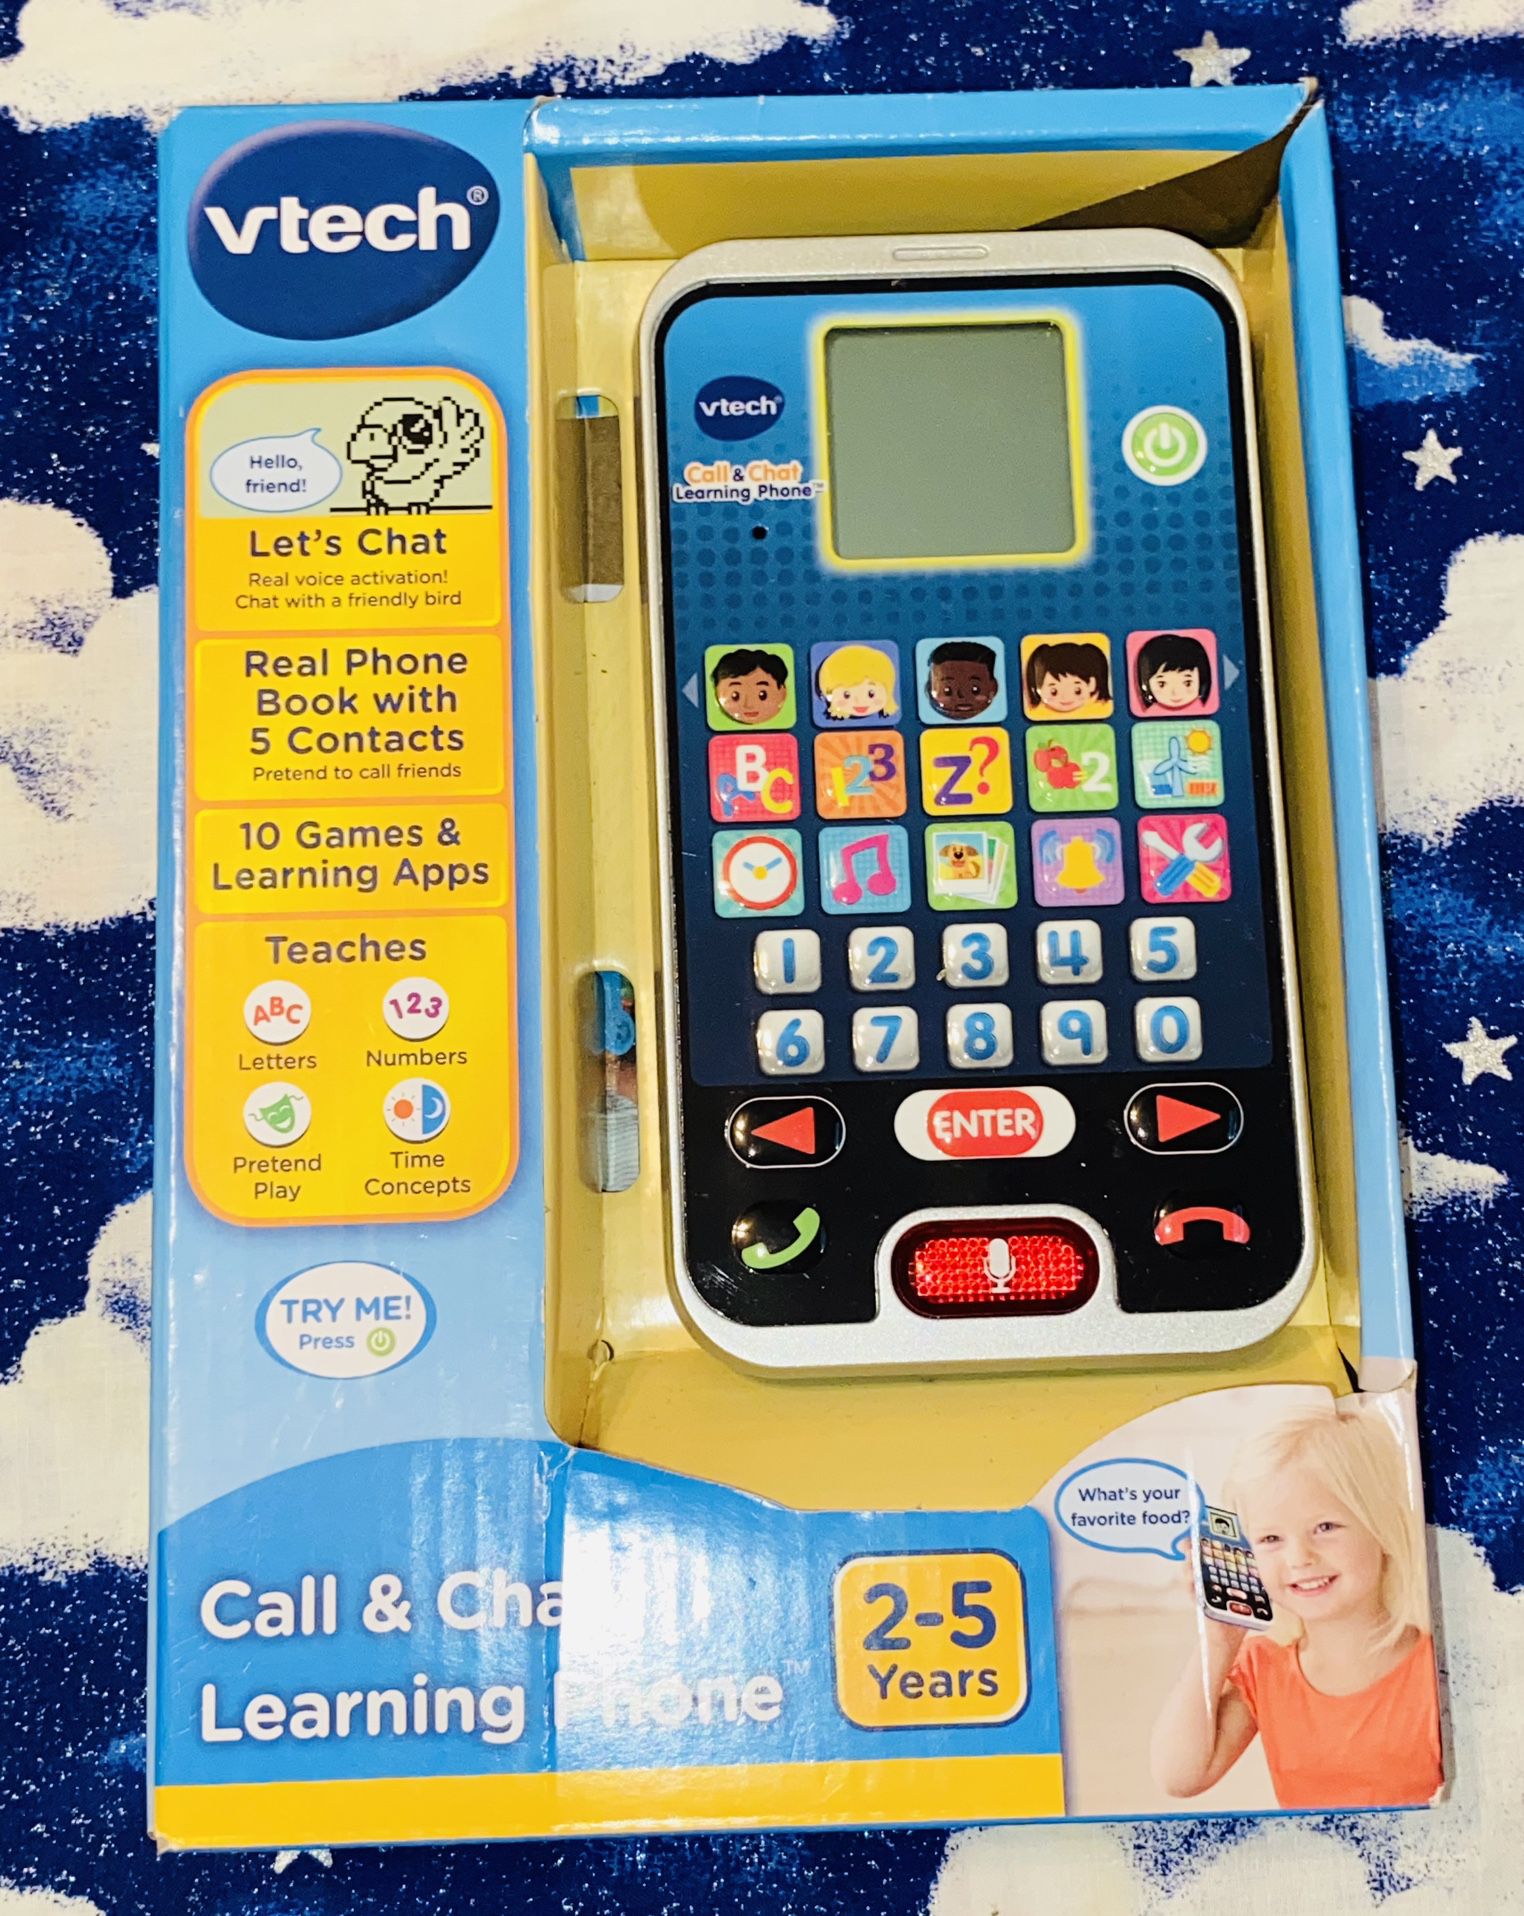 🟡📱🔵Vtech Call And Chat Learning Phone 10 Games & Learning Apps🔵📱🟡